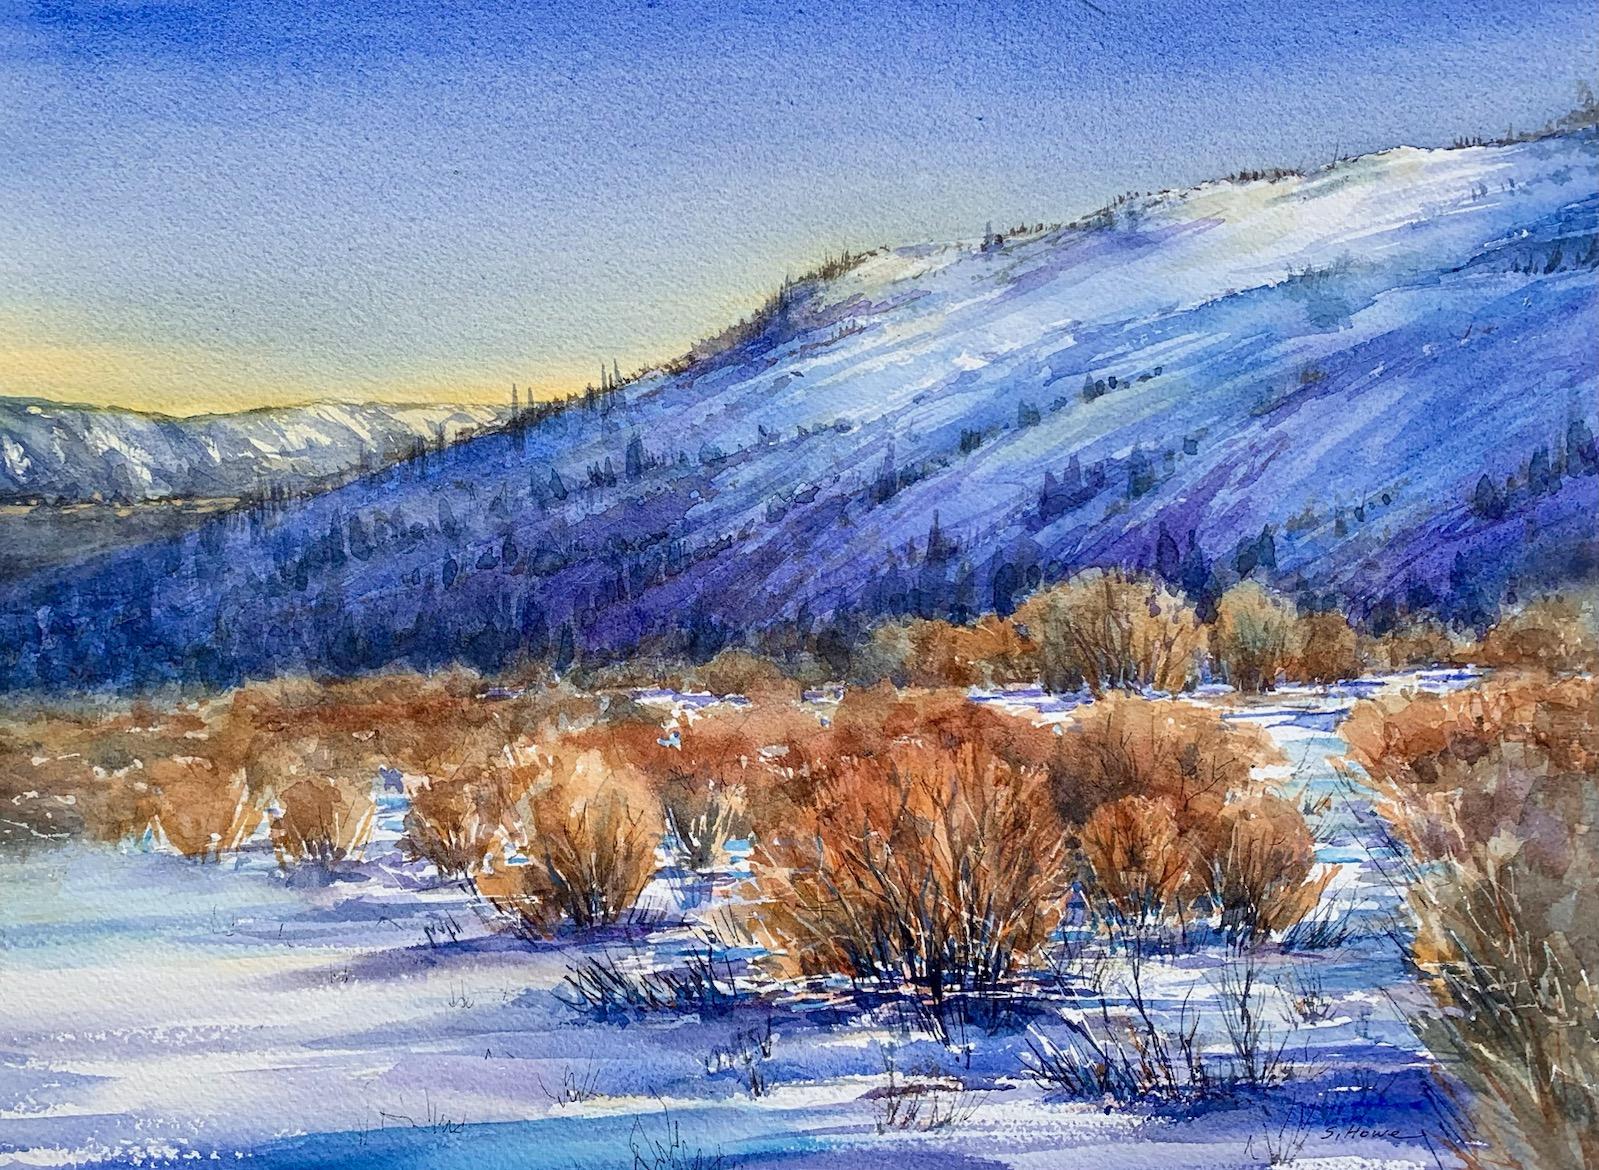 " Long Shadows " Framed Original Watercolor Watercolor Artist: Svetlana Howe Original watercolor painting  Winter scenery  On the road to Kremmling Colorado  20" long x 16" high matted in white matting  22" long x 18" high framed in a brown wooden frame  D-ring and wire on the back of the frame for hanging